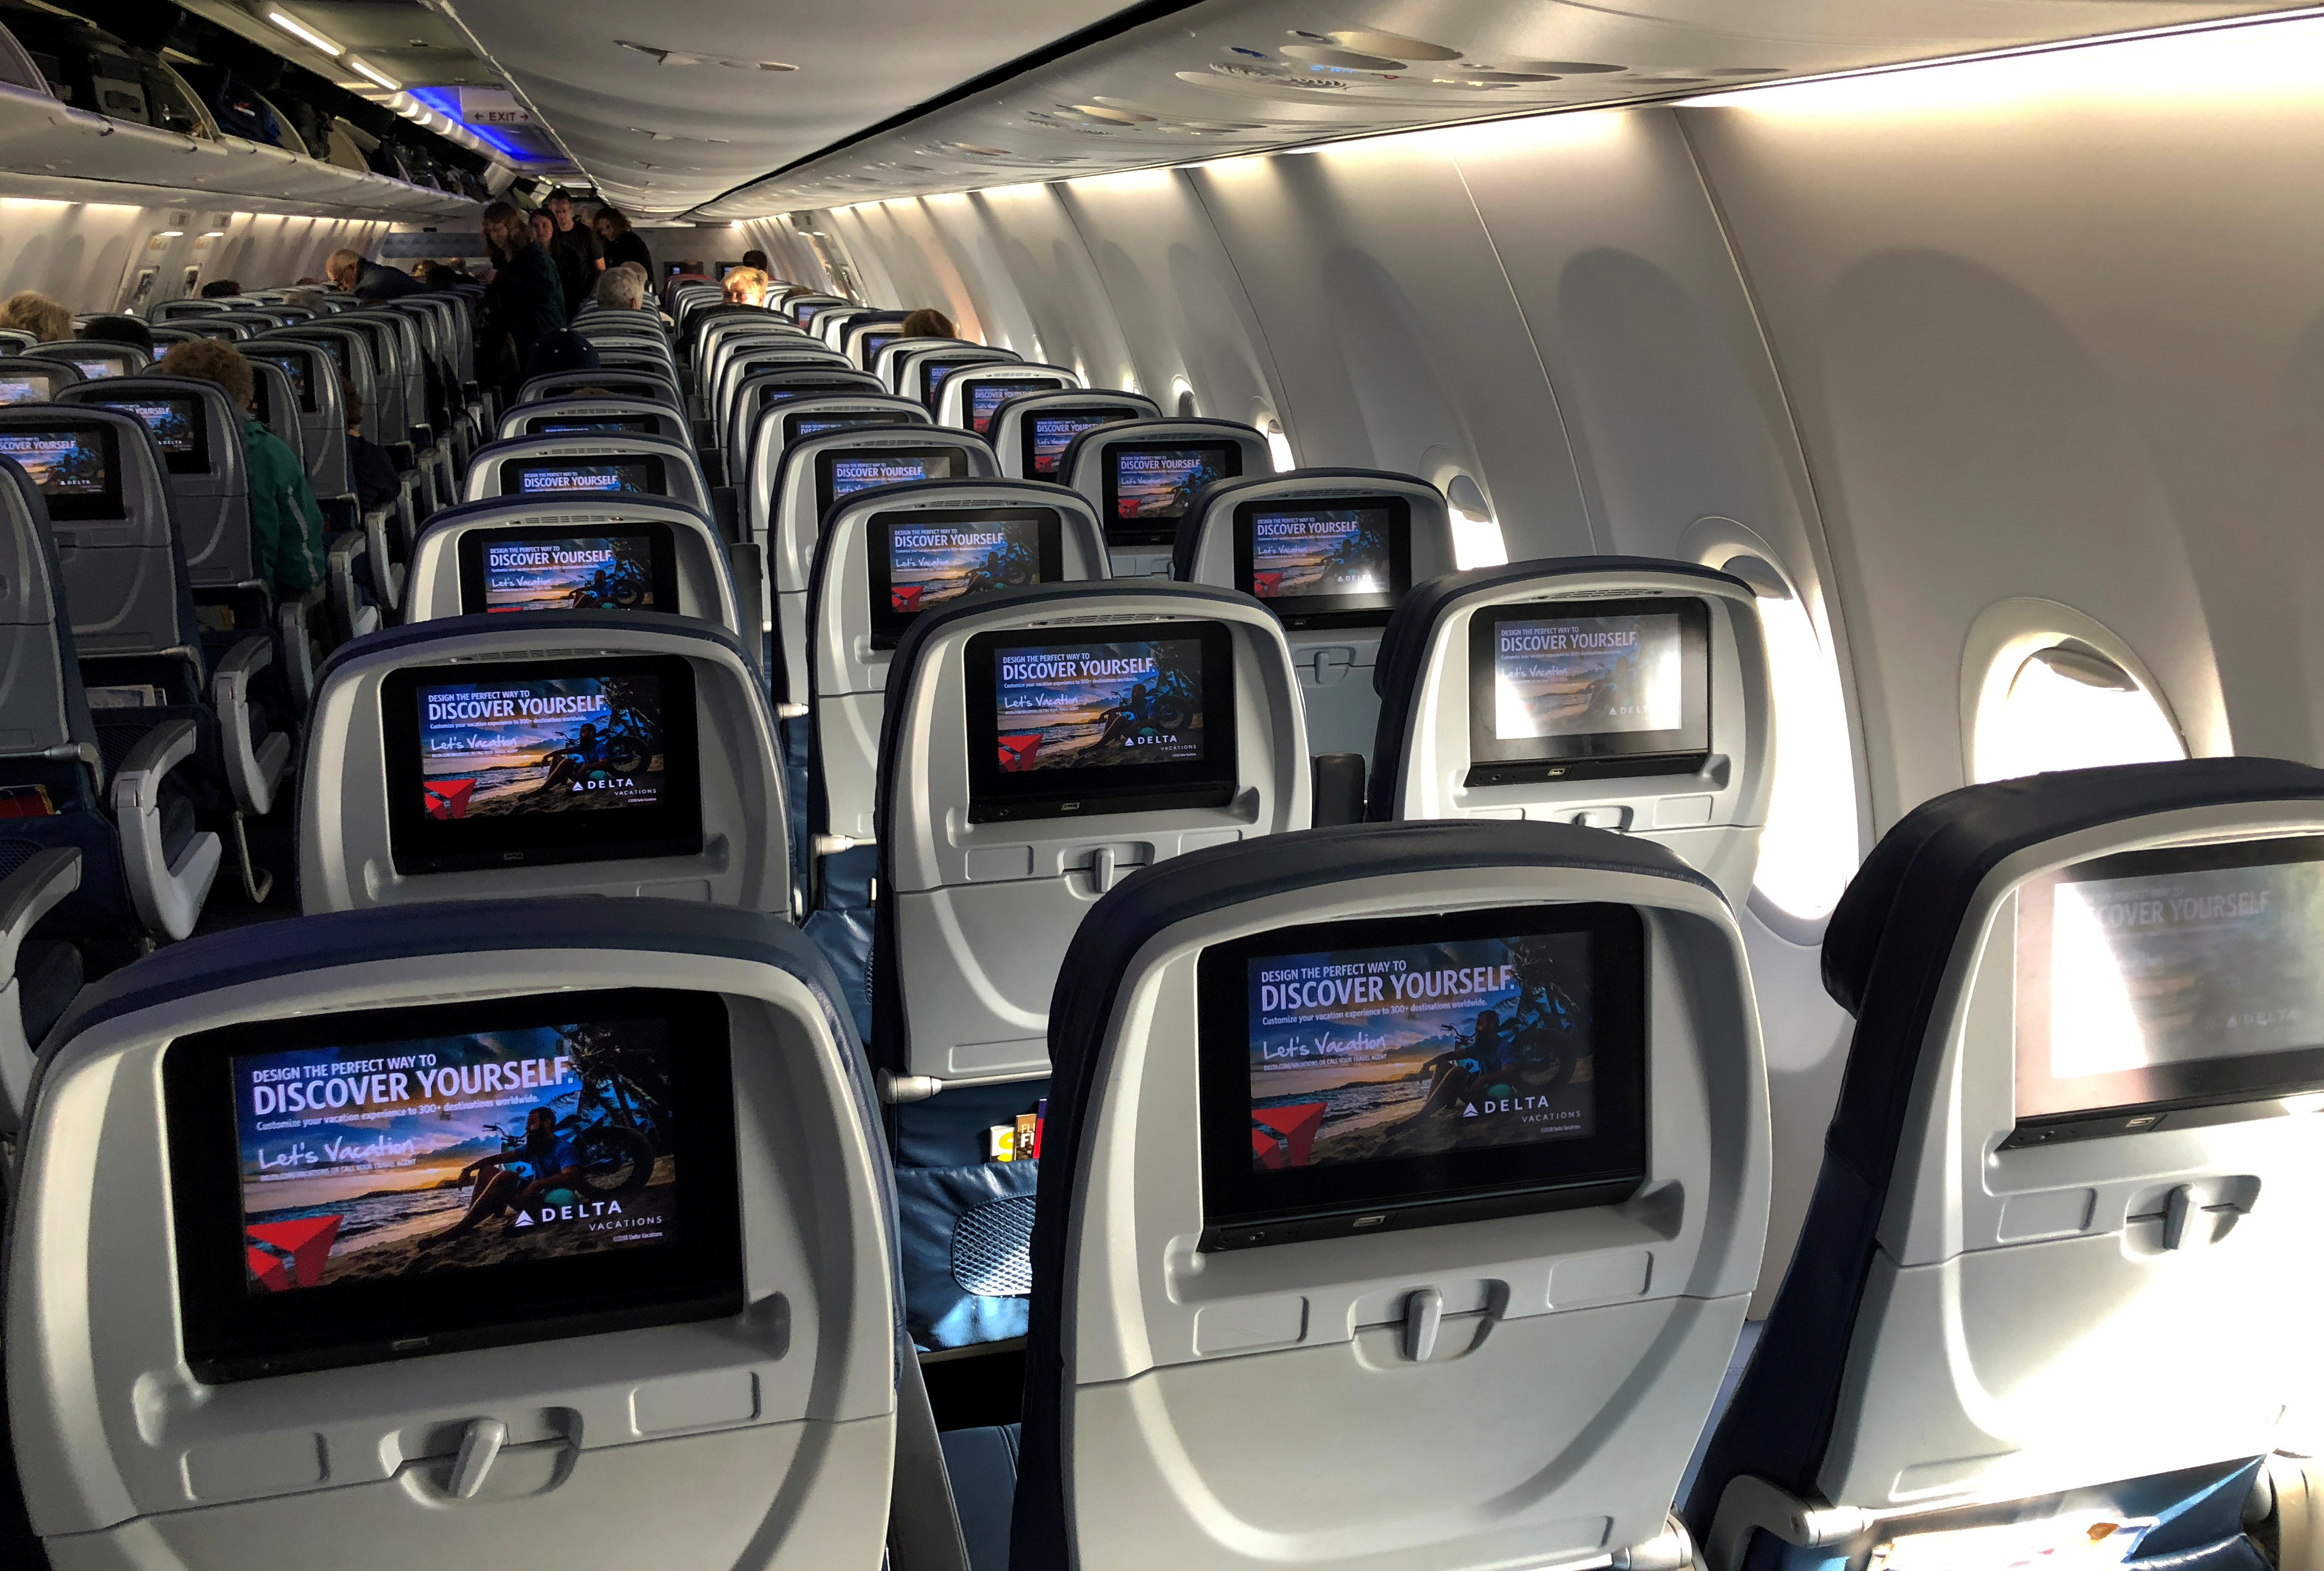 Video screens are shown built into the backs of passenger seats onboard a Delta Airlines Boeing 737-900ER aircraft in San Diego